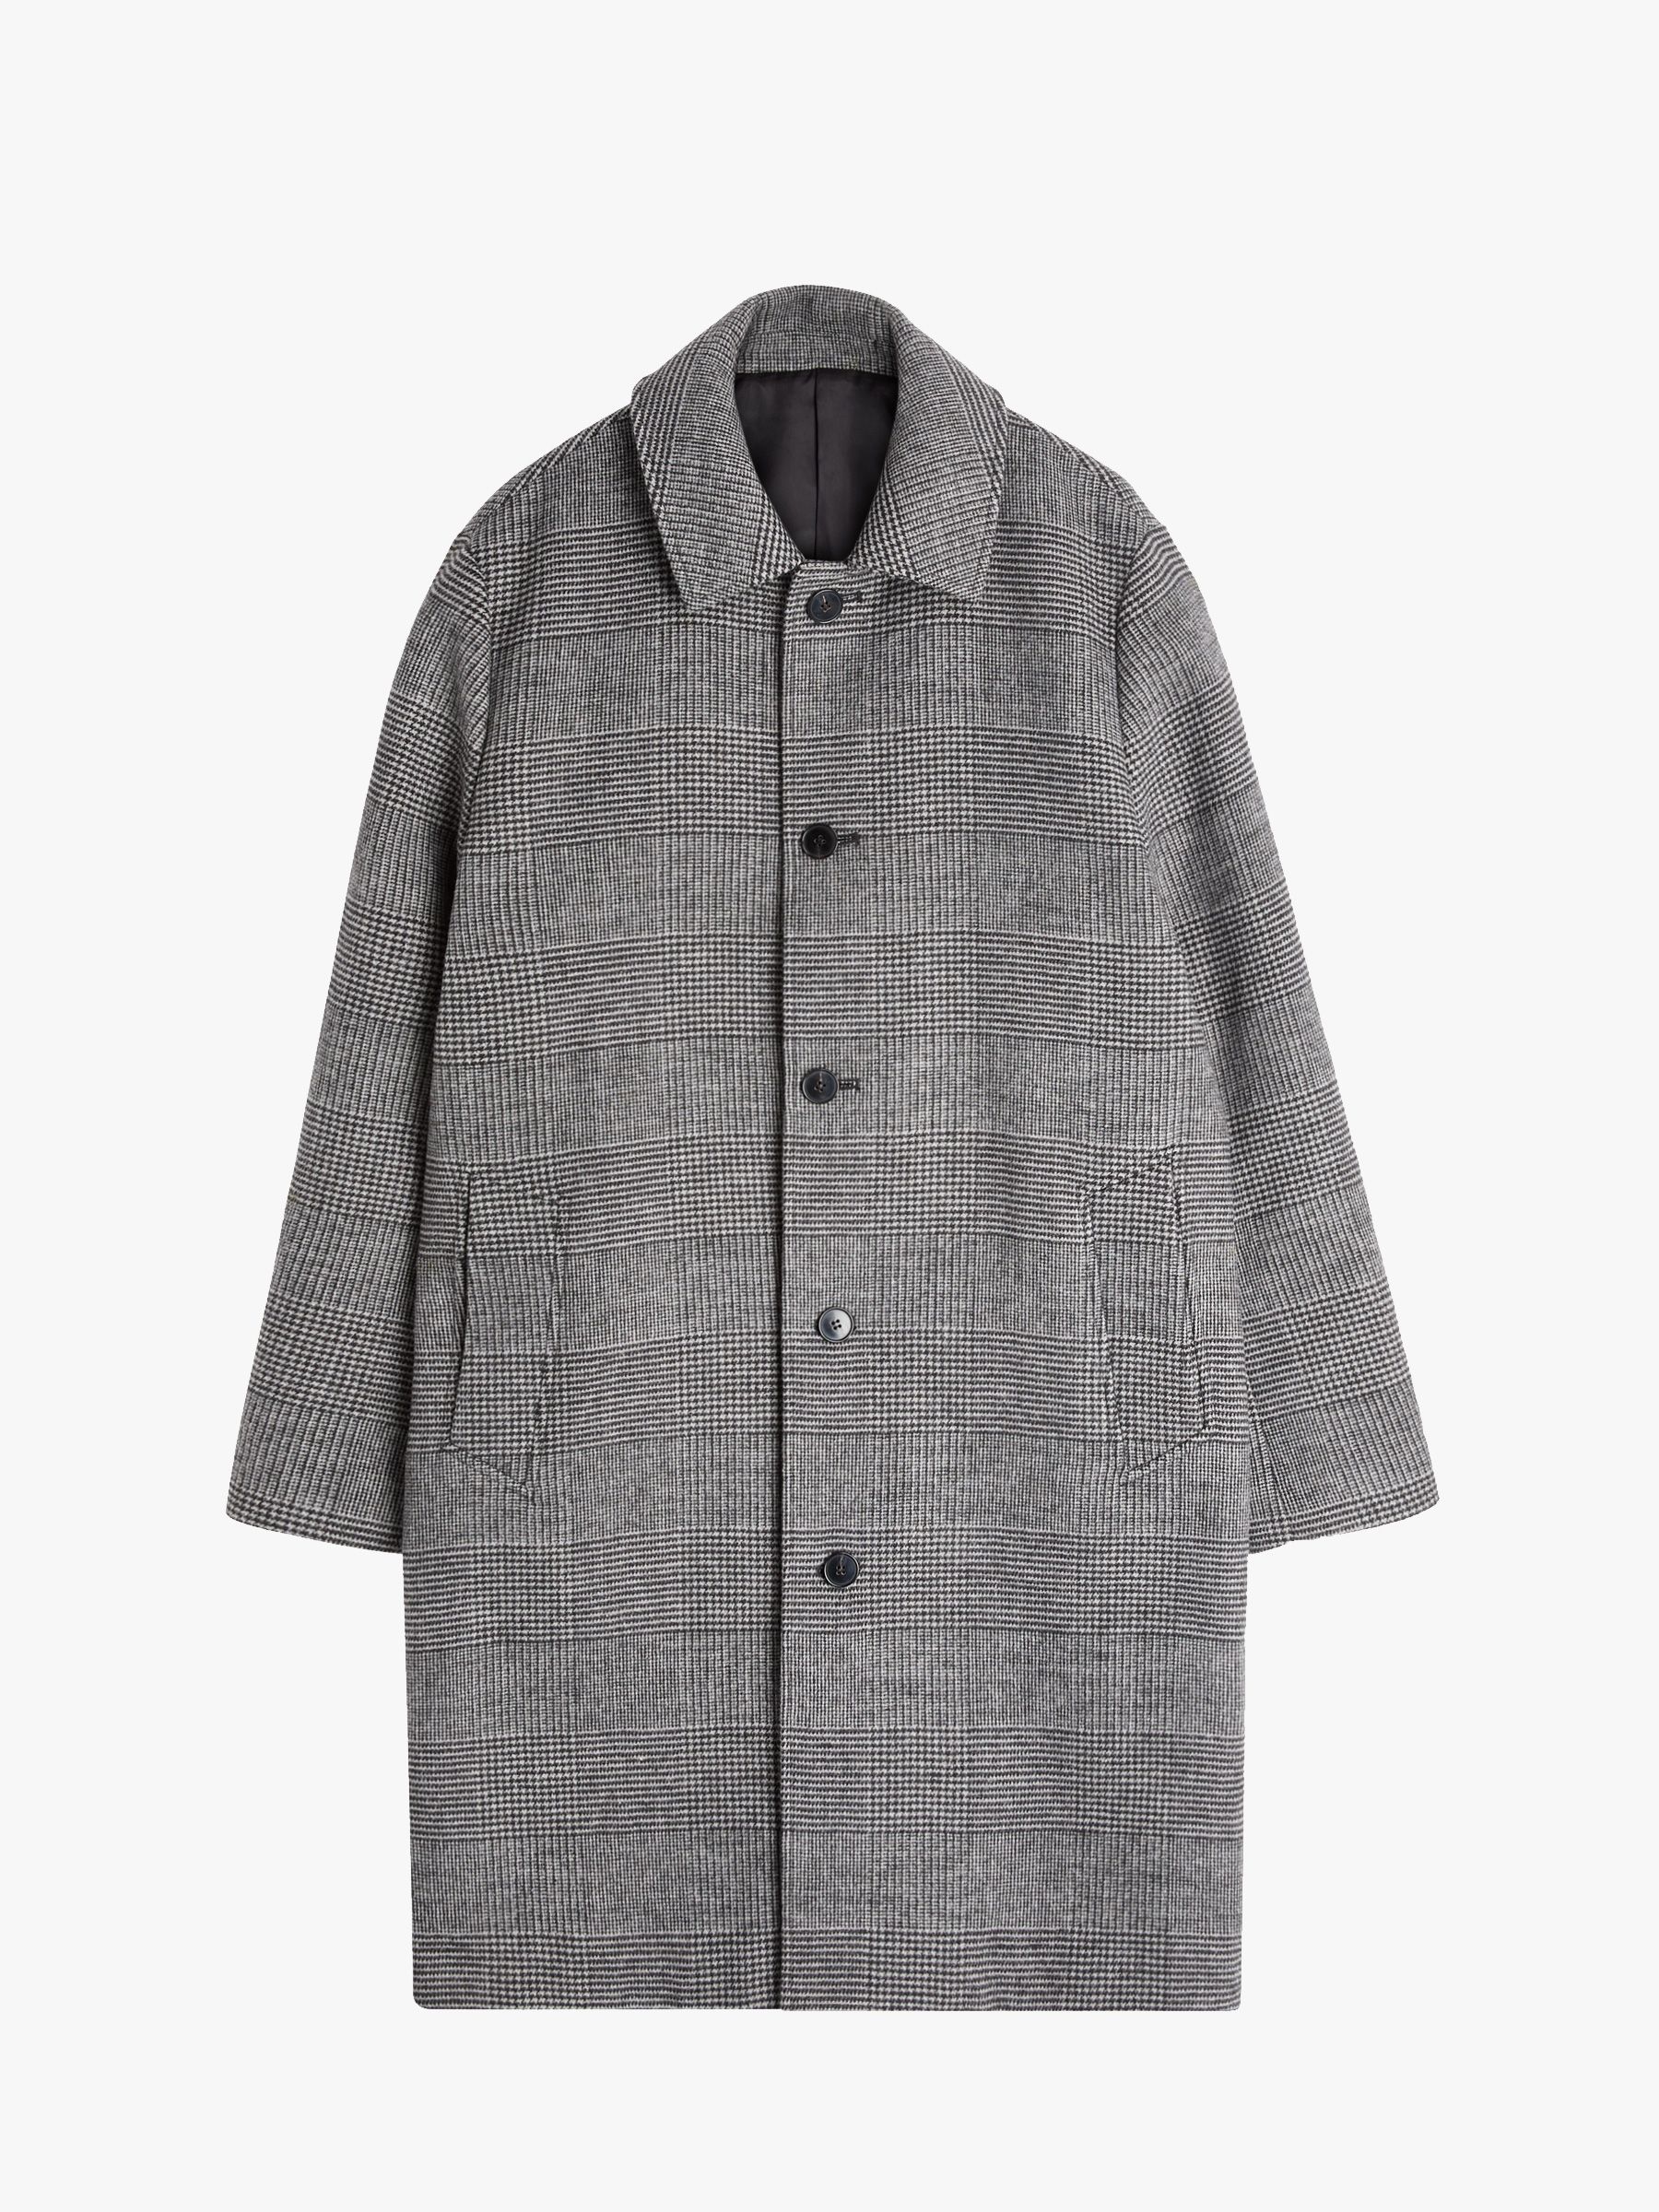 John Lewis Double Faced Check Wool Blend Overcoat, Charcoal